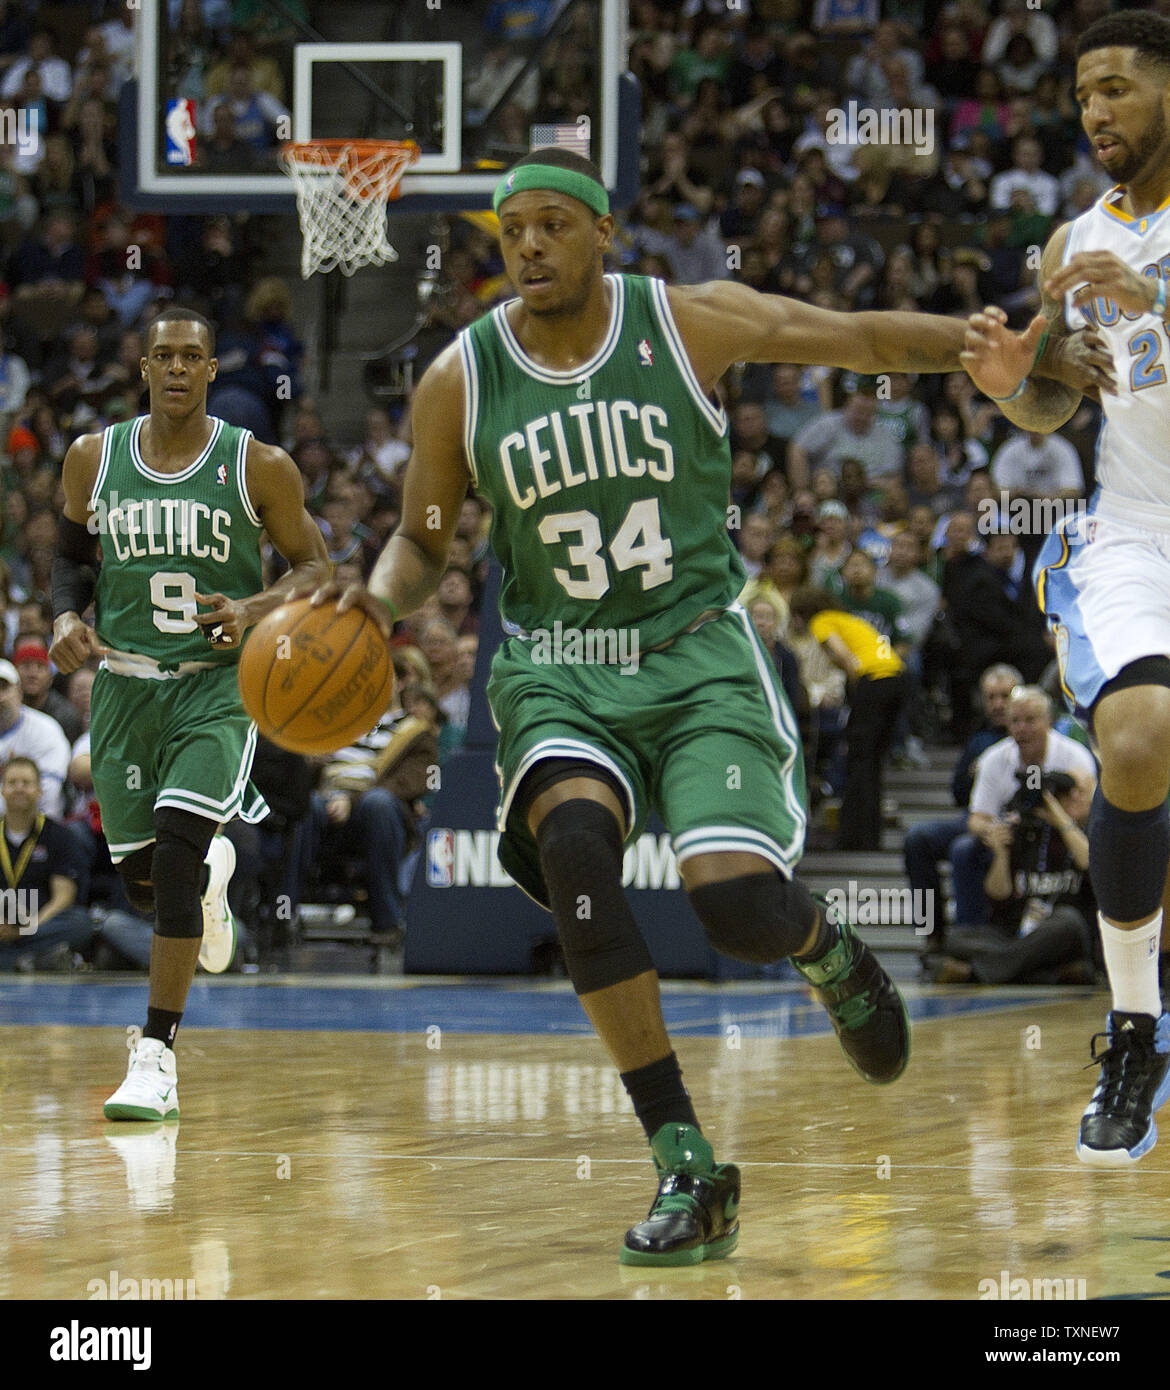 Boston Celtics forward Paul Pierce (34) pushes away Denver Nuggets forward Wilson Chandler during the fourth quarter at the Pepsi Center in Denver on February 24, 2011.    The Nuggets beat the Celtics 89-75 for their second straight win since trading star forward Carmelo Anthony.    UPI/Gary C. Caskey Stock Photo